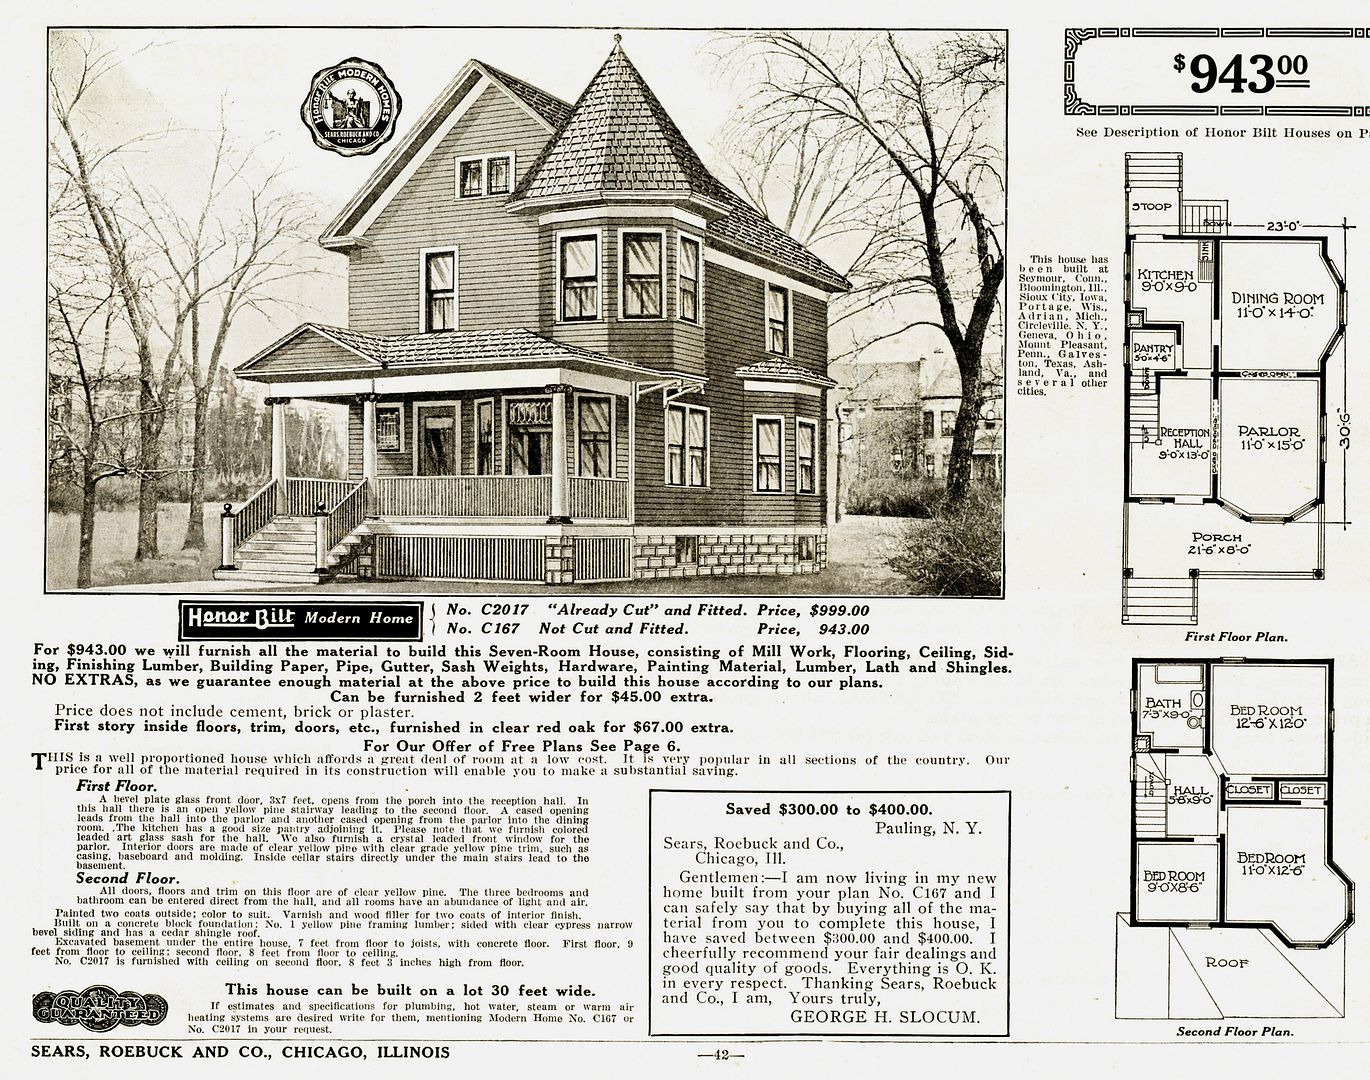 The Sears Maytown as seen in the 1916 Sears Modern Homes catalog